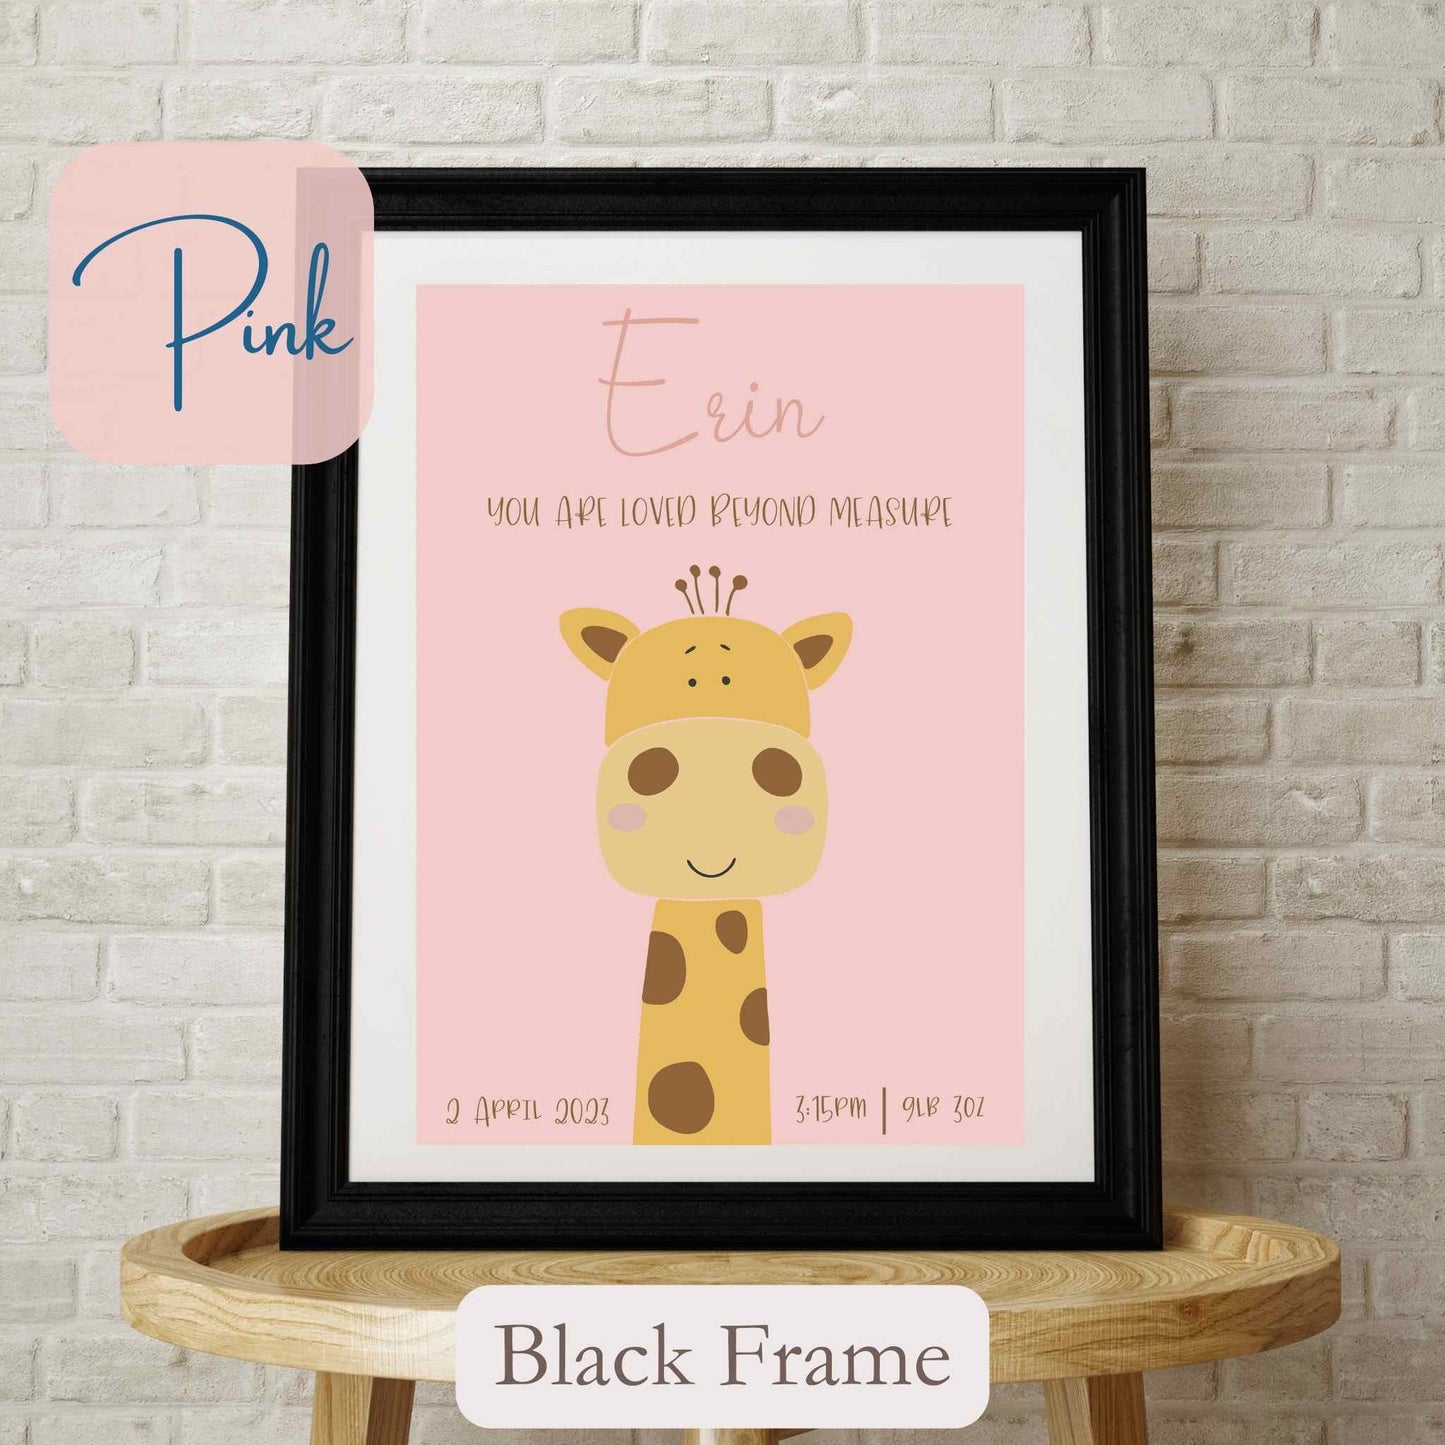 Personalised Framed Print with cute Giraffe, on pink coloured background with child’s name, and wording under name. Black Frame.